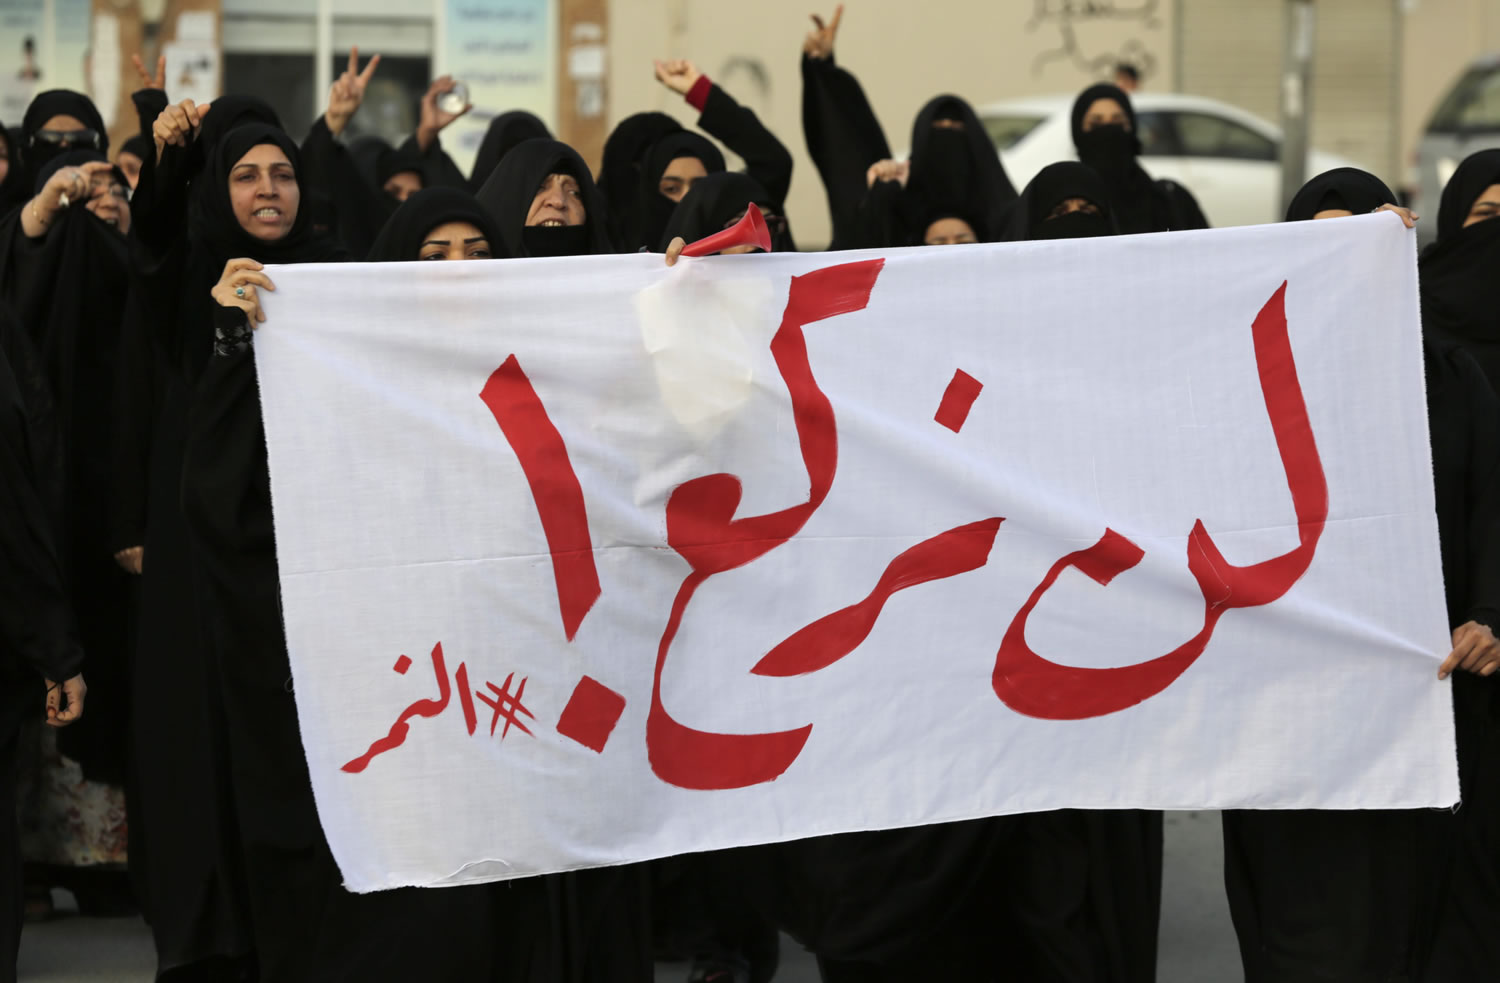 Bahraini protesters carry a banner reading, "We will not bow! #alNimr," during a demonstration against Saudi Arabia's execution of Shiite cleric Sheikh Nimr al-Nimr, in Daih, Bahrain, Saturday, Jan. 2, 2016. Saudi Arabia announced Saturday it had executed 47 prisoners convicted of terrorism charges, including al-Qaida detainees and al-Nimr, who rallied protests against the Saudi government. The execution of al-Nimr is expected to deepen discontent among Saudi Arabia's Shiite minority and heighten sectarian tensions across the region.